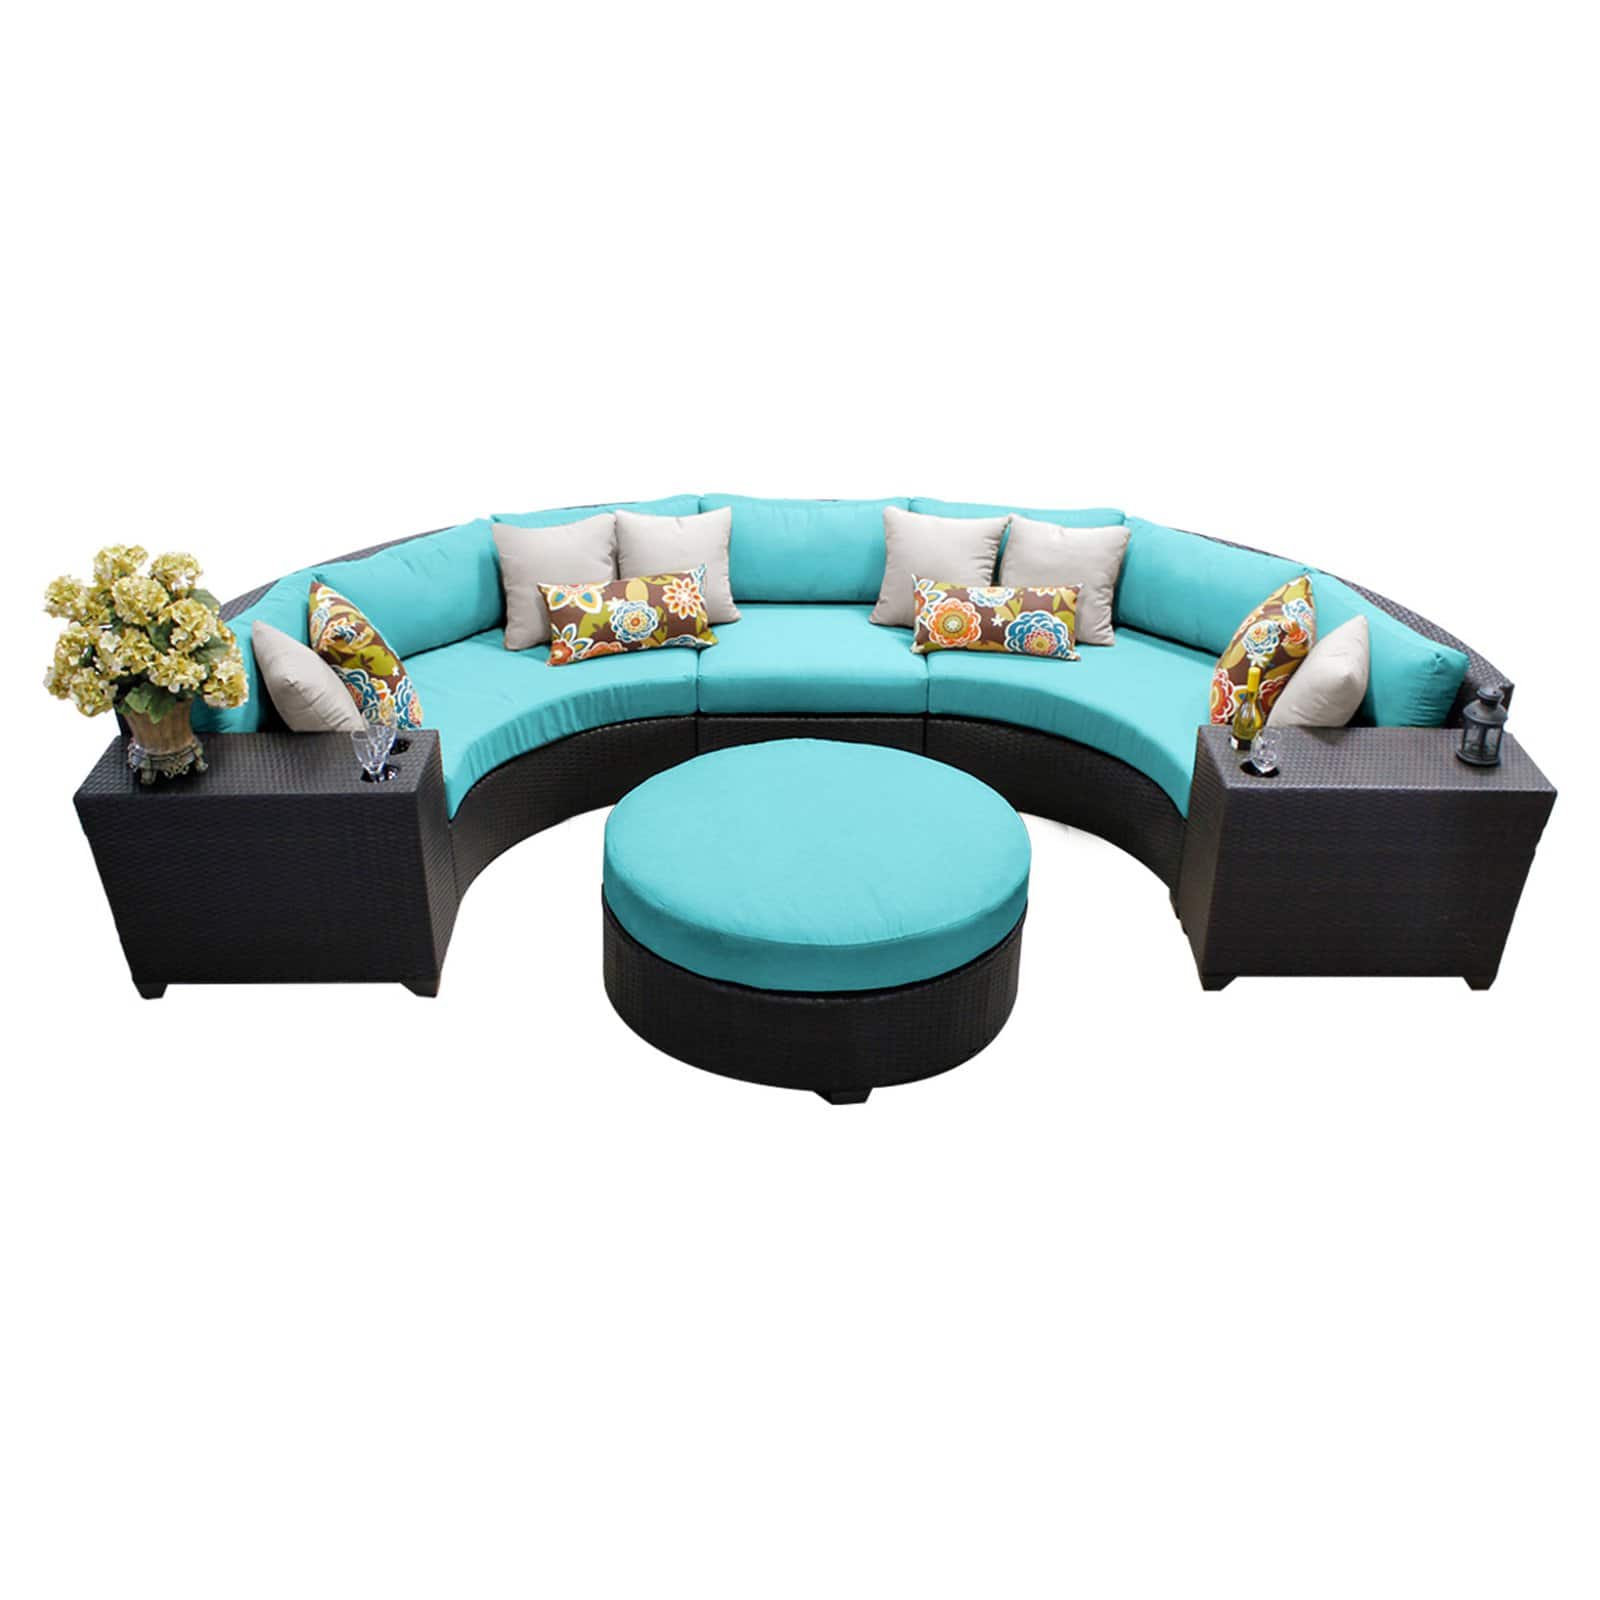 TK Classics Barbados Wicker 6 Piece Patio Conversation Set with Round Coffee Table and 2 Sets of Cushion Covers - image 2 of 2